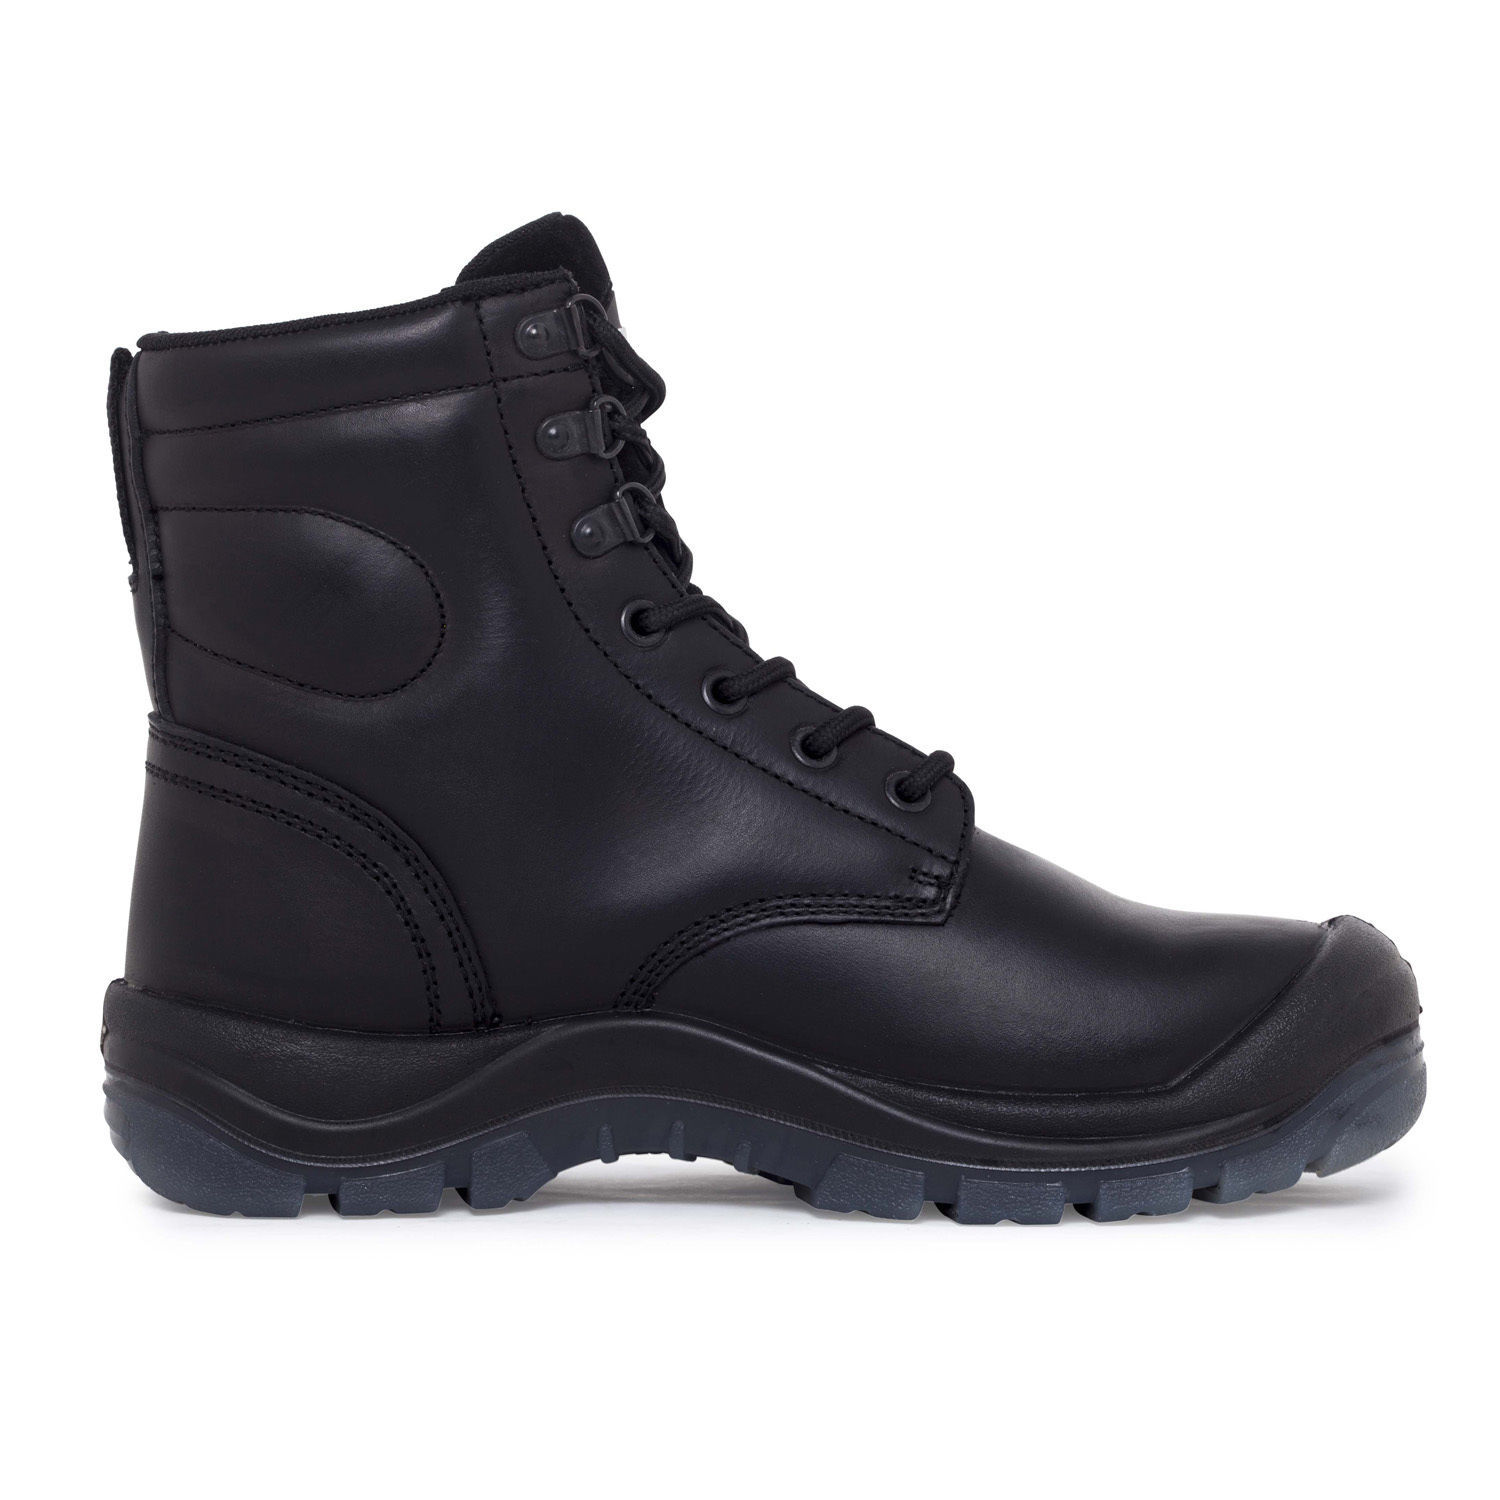 Mack Safety Boots - Charge - need1.com.au